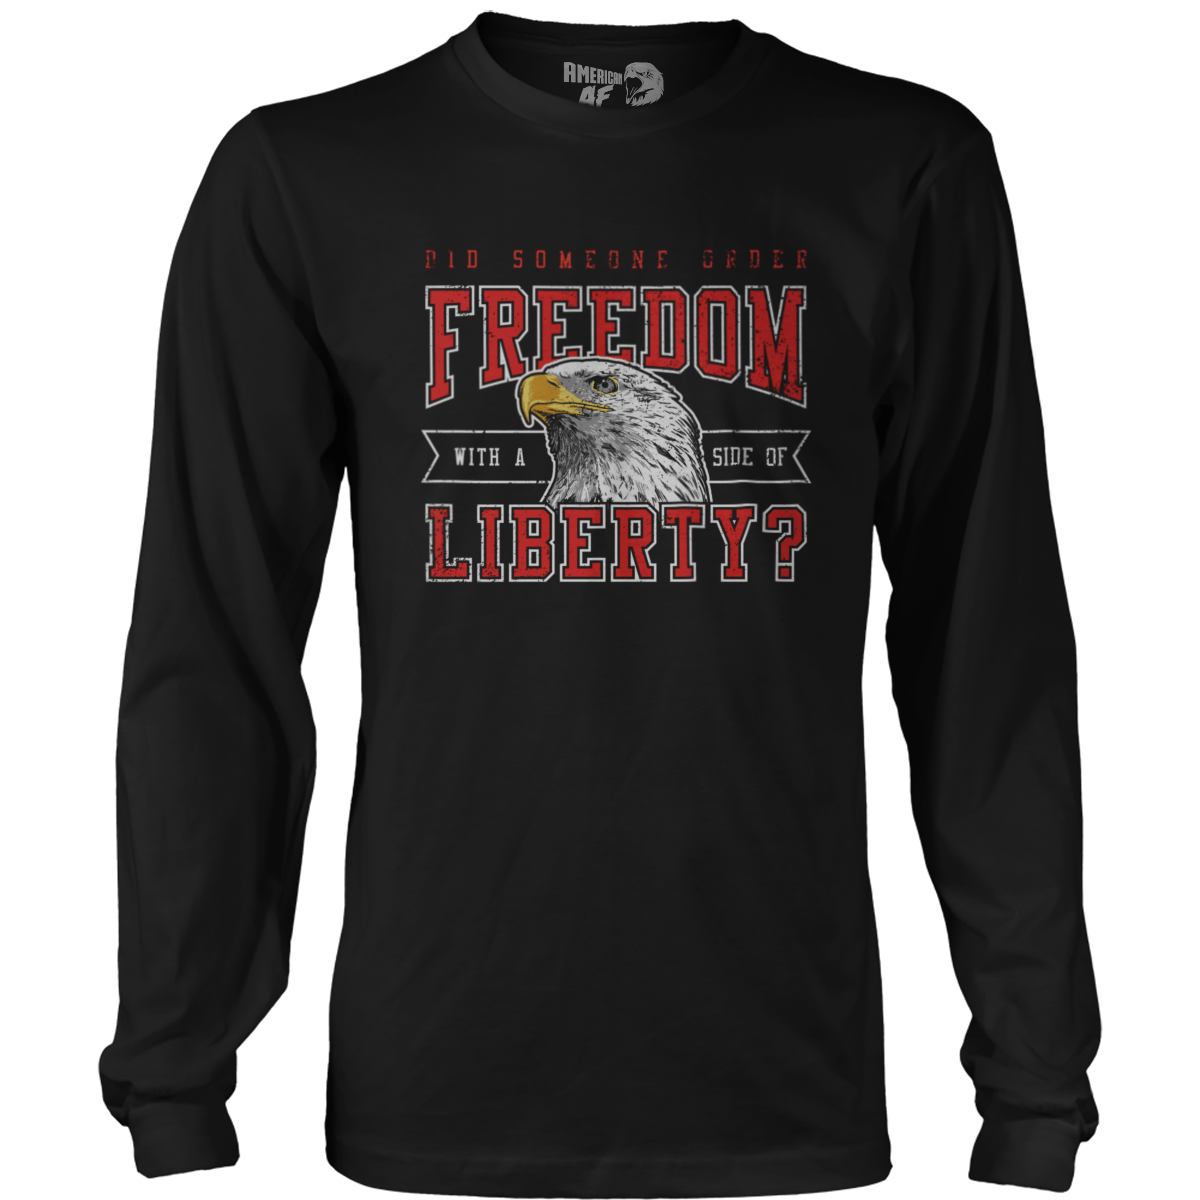 Apparel Mens Long Sleeve / Black / S Side Of Liberty - May 2020 Club AAF Exclusive Design